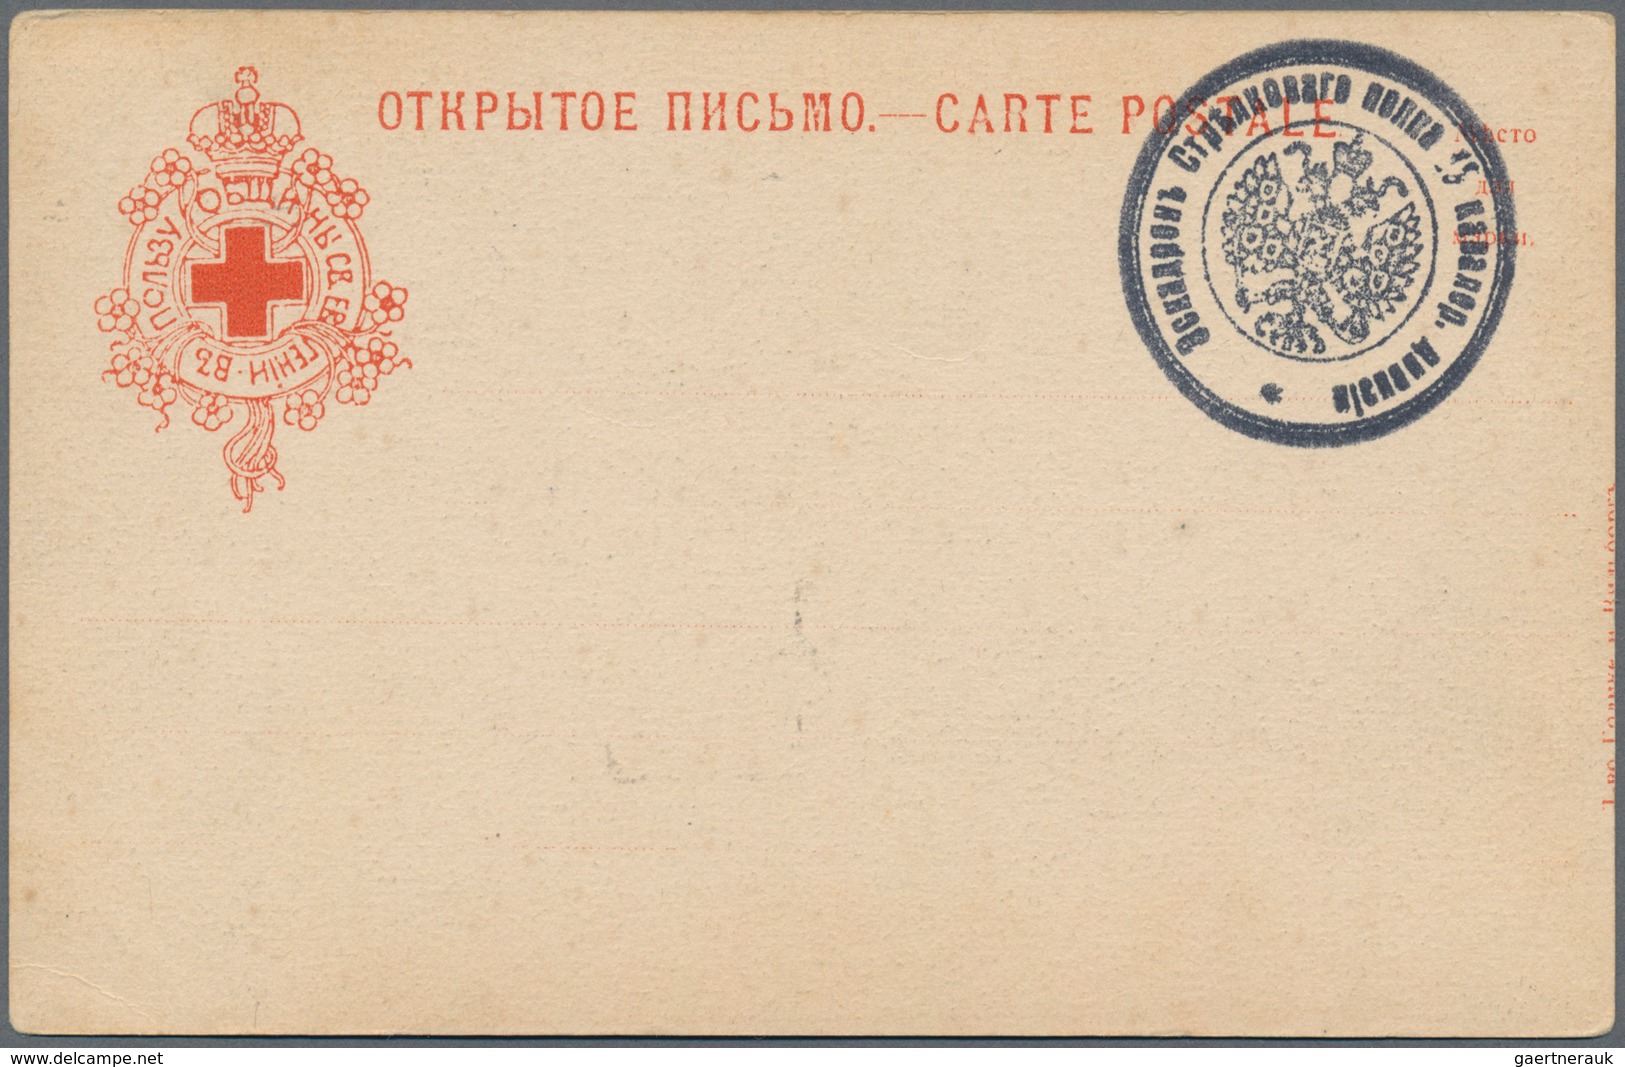 Russische Post In China: 1904/05 Russo-Japanese War Two Red Cross Charity Cards To Benefit The Commu - China